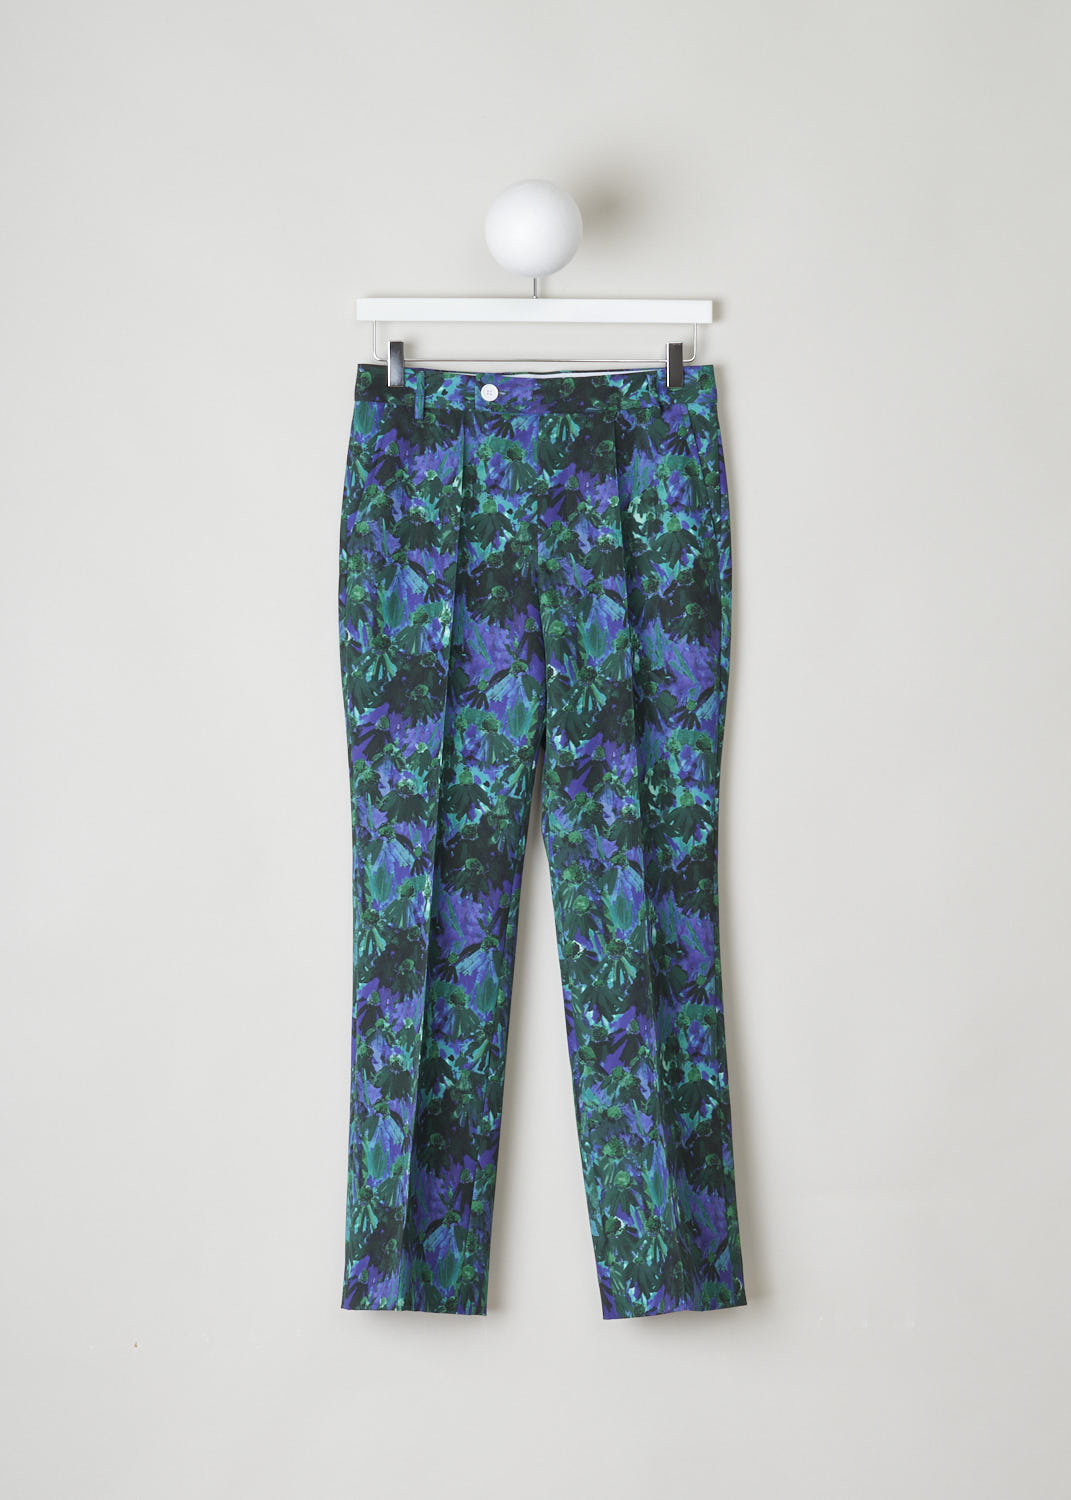 PLAN C,  MULTICOLORED FLORAL TROUSERS, PNCAA06B08_TP069_FIV02_GREEN_CLOVER, Print, Front, These multicolored floral trousers have belt loops, a contrasting white button and a concealed zip fastening as well as slanted pockets in the front and buttoned welt pockets in the back. On the pant legs, centre pleats can be found front and back.
